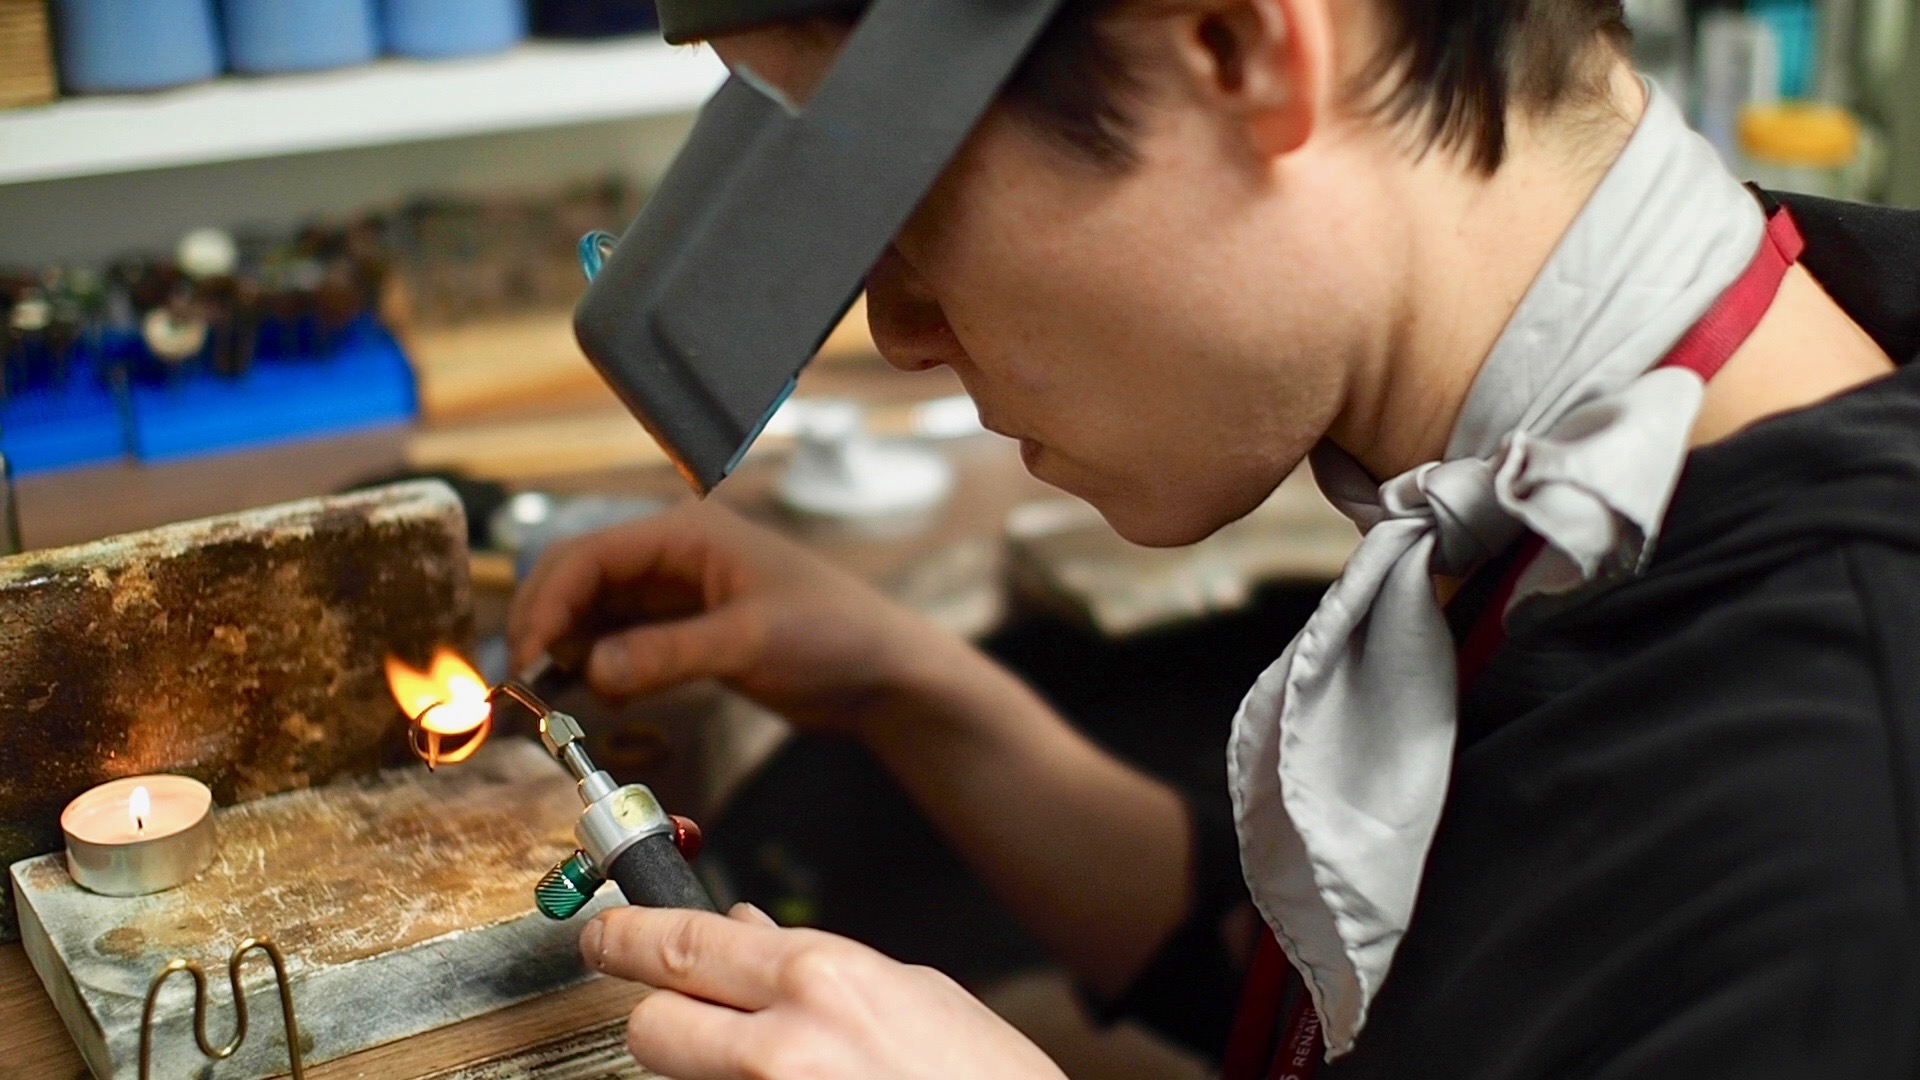 jewellery maker wearing goggles applying a flame to a ring in a jewellery workshop setting